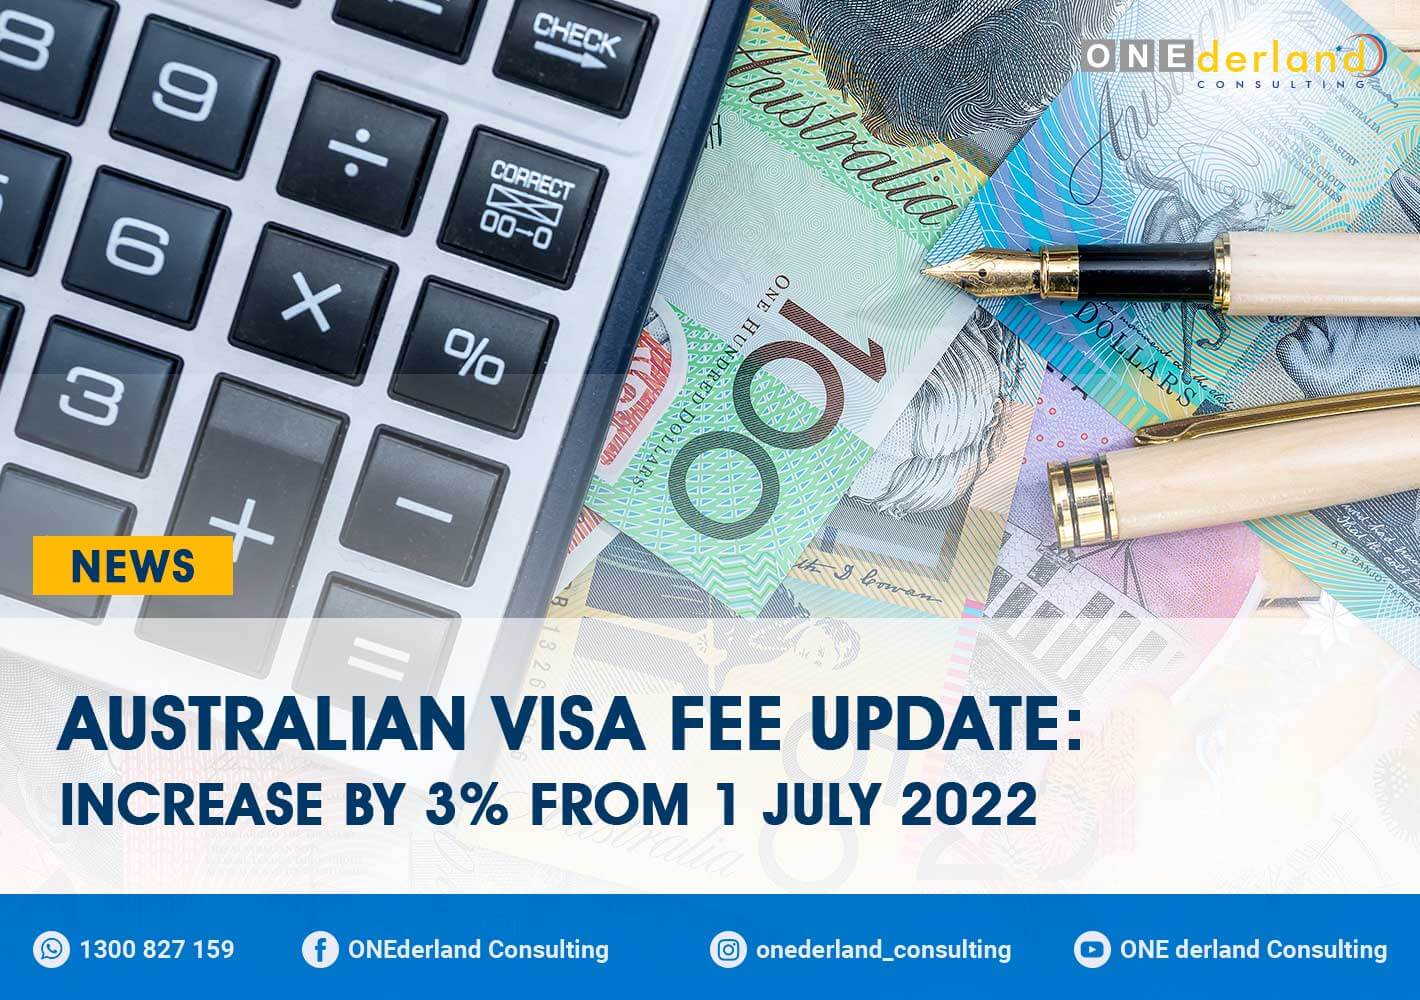 It’s Official! Australian Visa Fee Increases by 3% starting from 1 July 2022